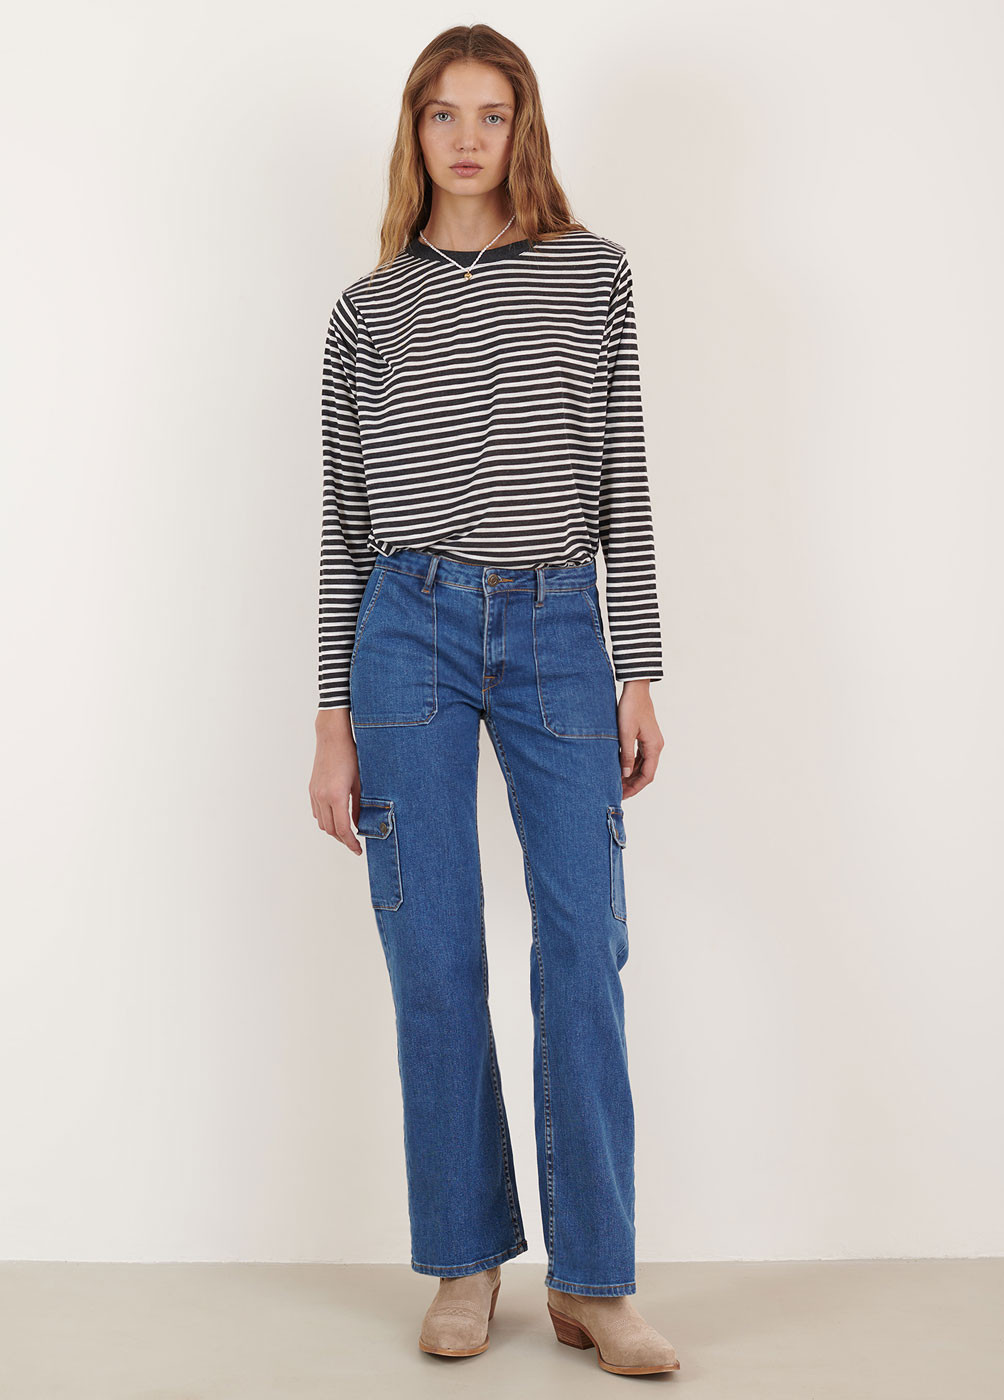 STRIPED T-SHIRT WITH SHOULDER DETAIL